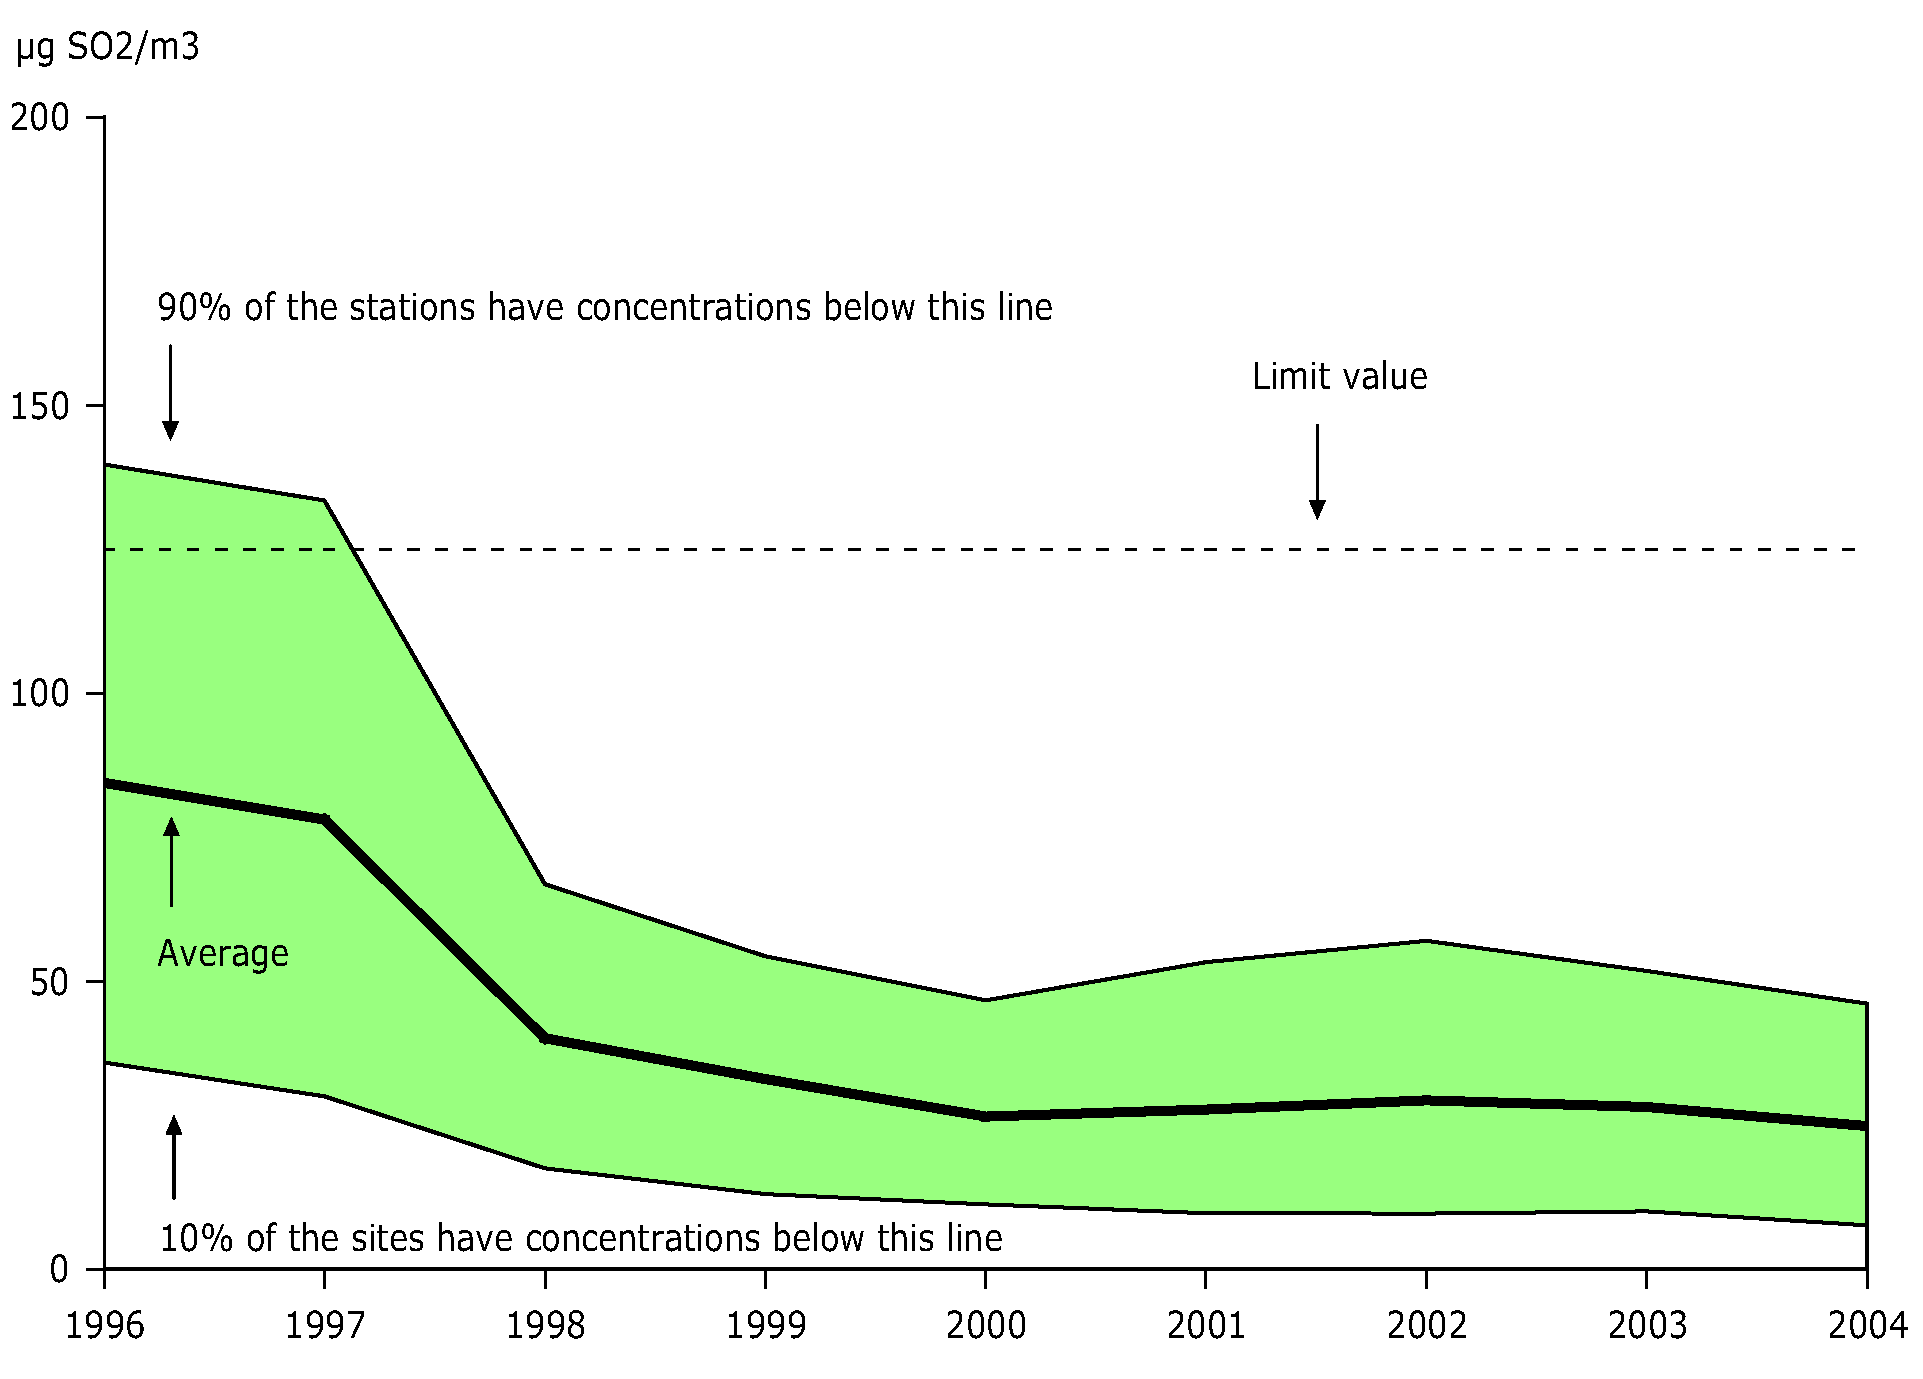 4th highest 24-hour mean SO2 concentration observed at urban stations, EEA member countries, 1996-2004